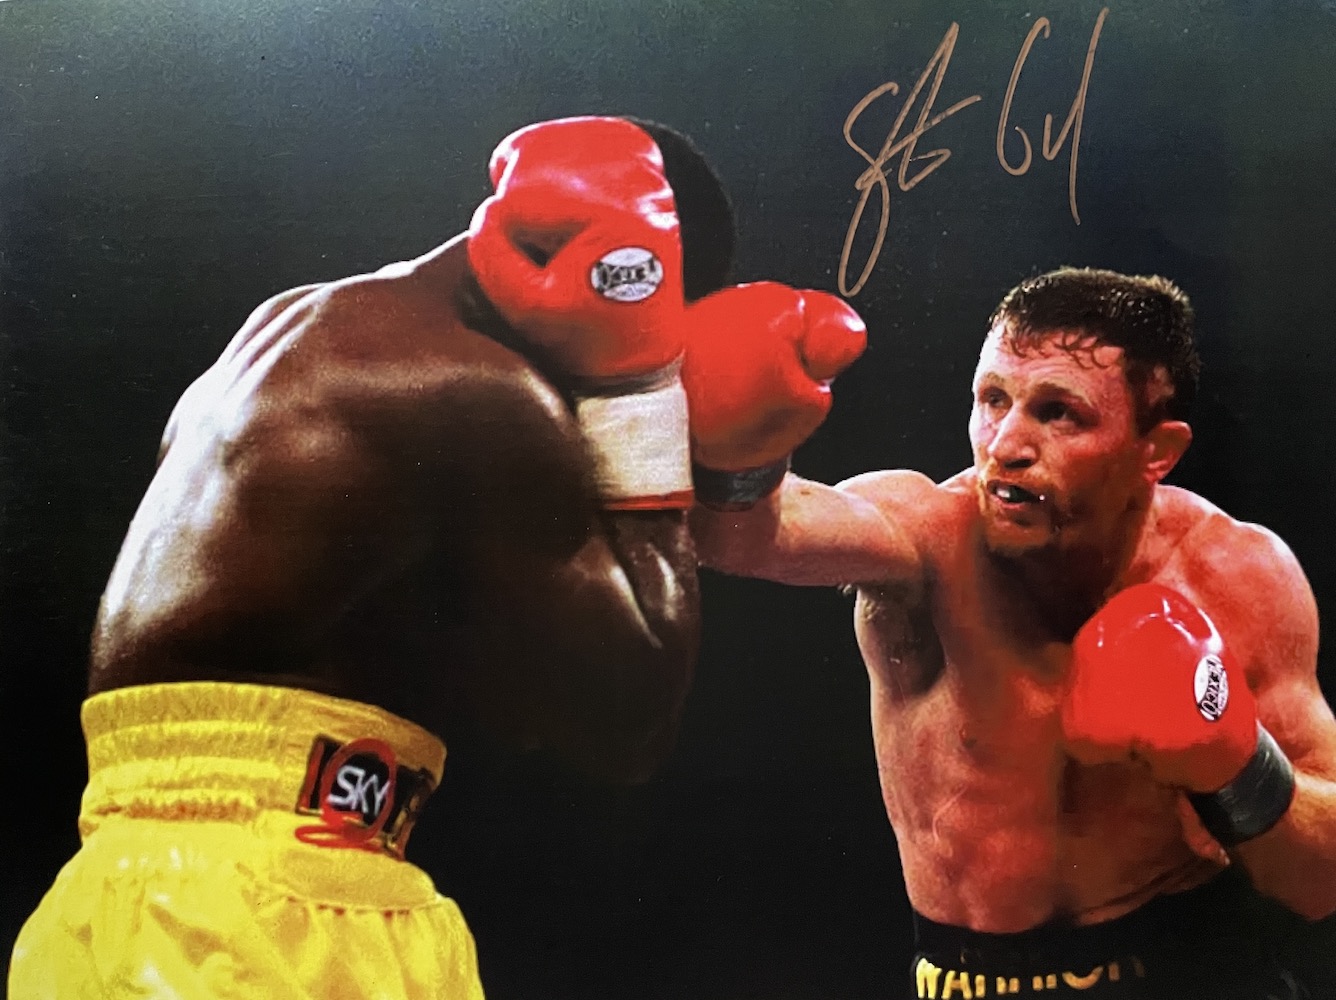 Steve Collins Former World Champion Large 16x12 inch Signed Photo. Good condition. All autographs